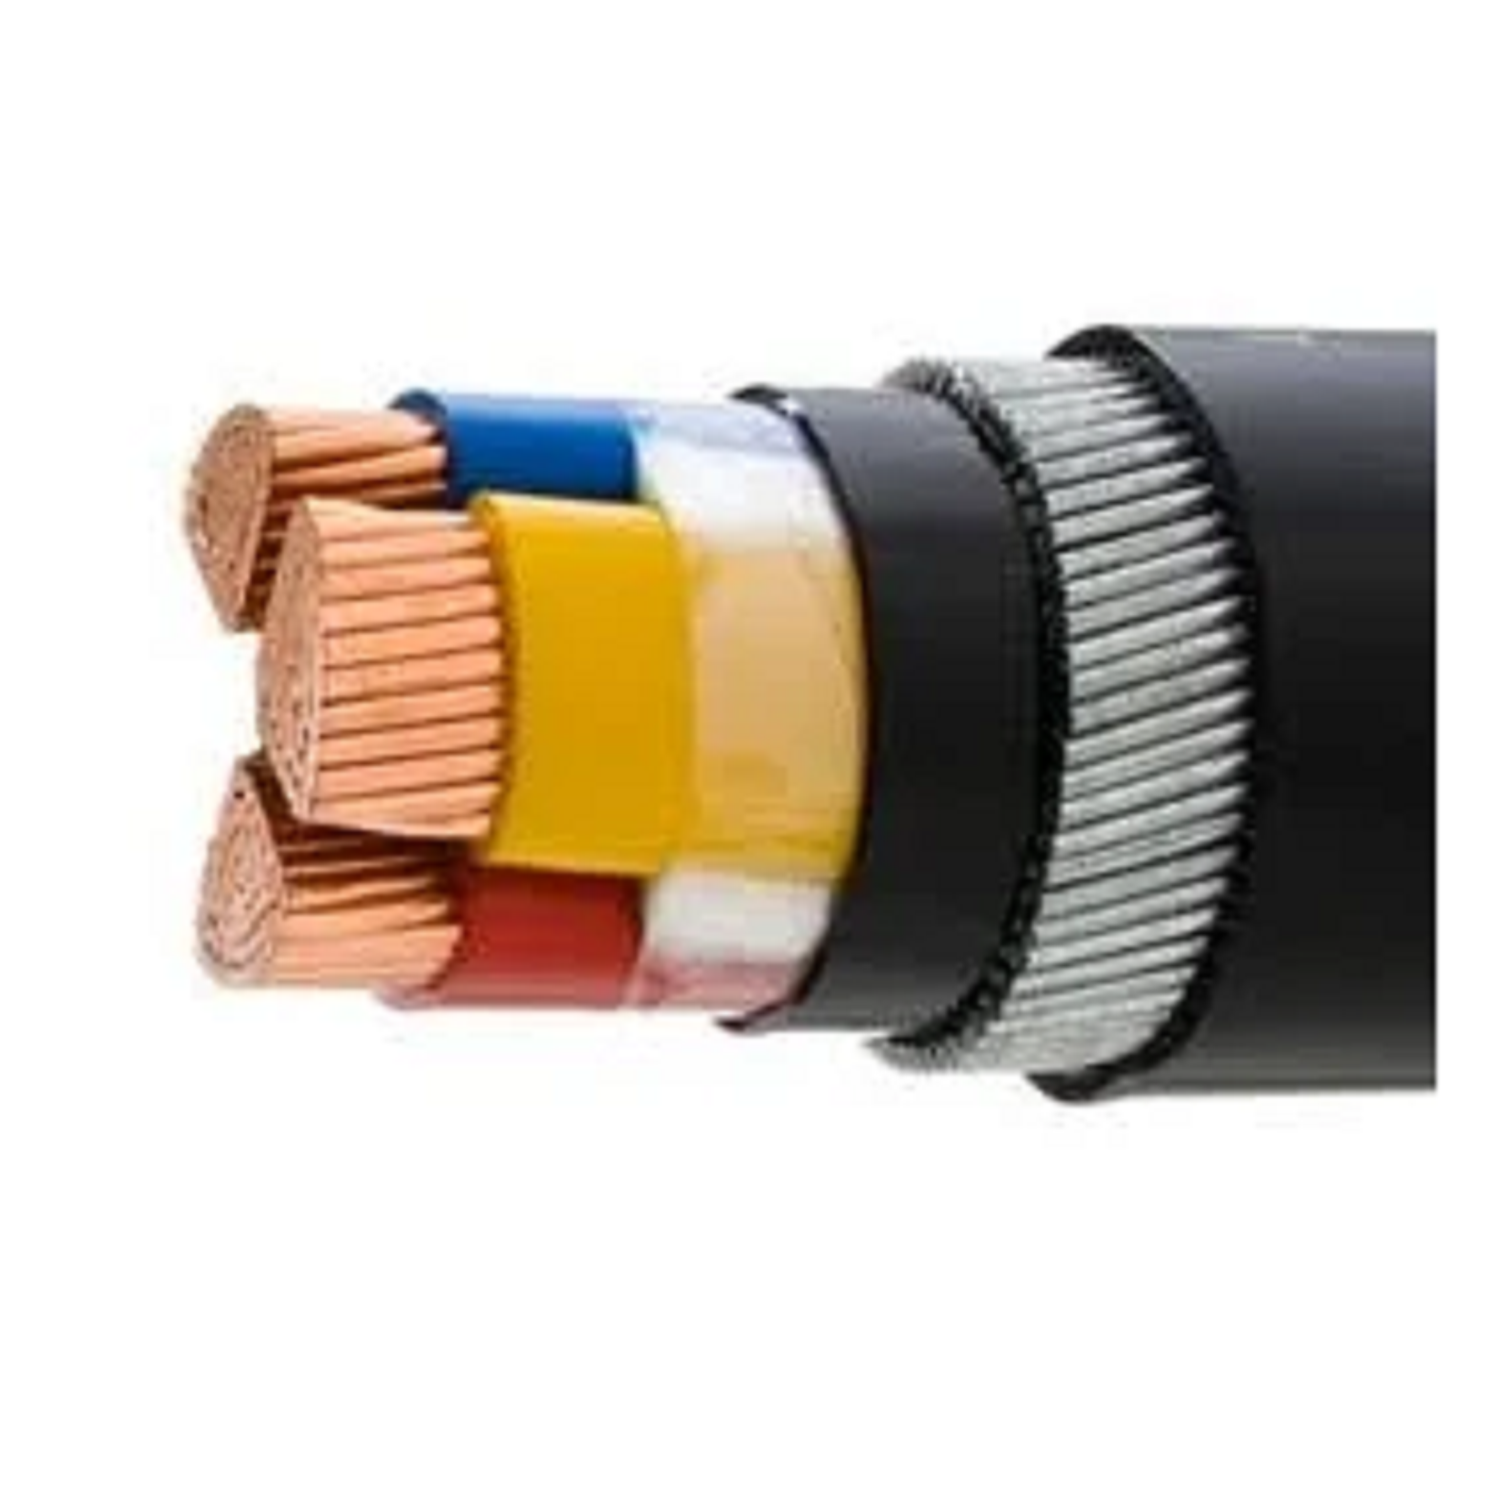 4.0 Sqmm Polycab Copper Armoured Cable (11 KV) Round Shape For Domestic 38 Industrial Uses